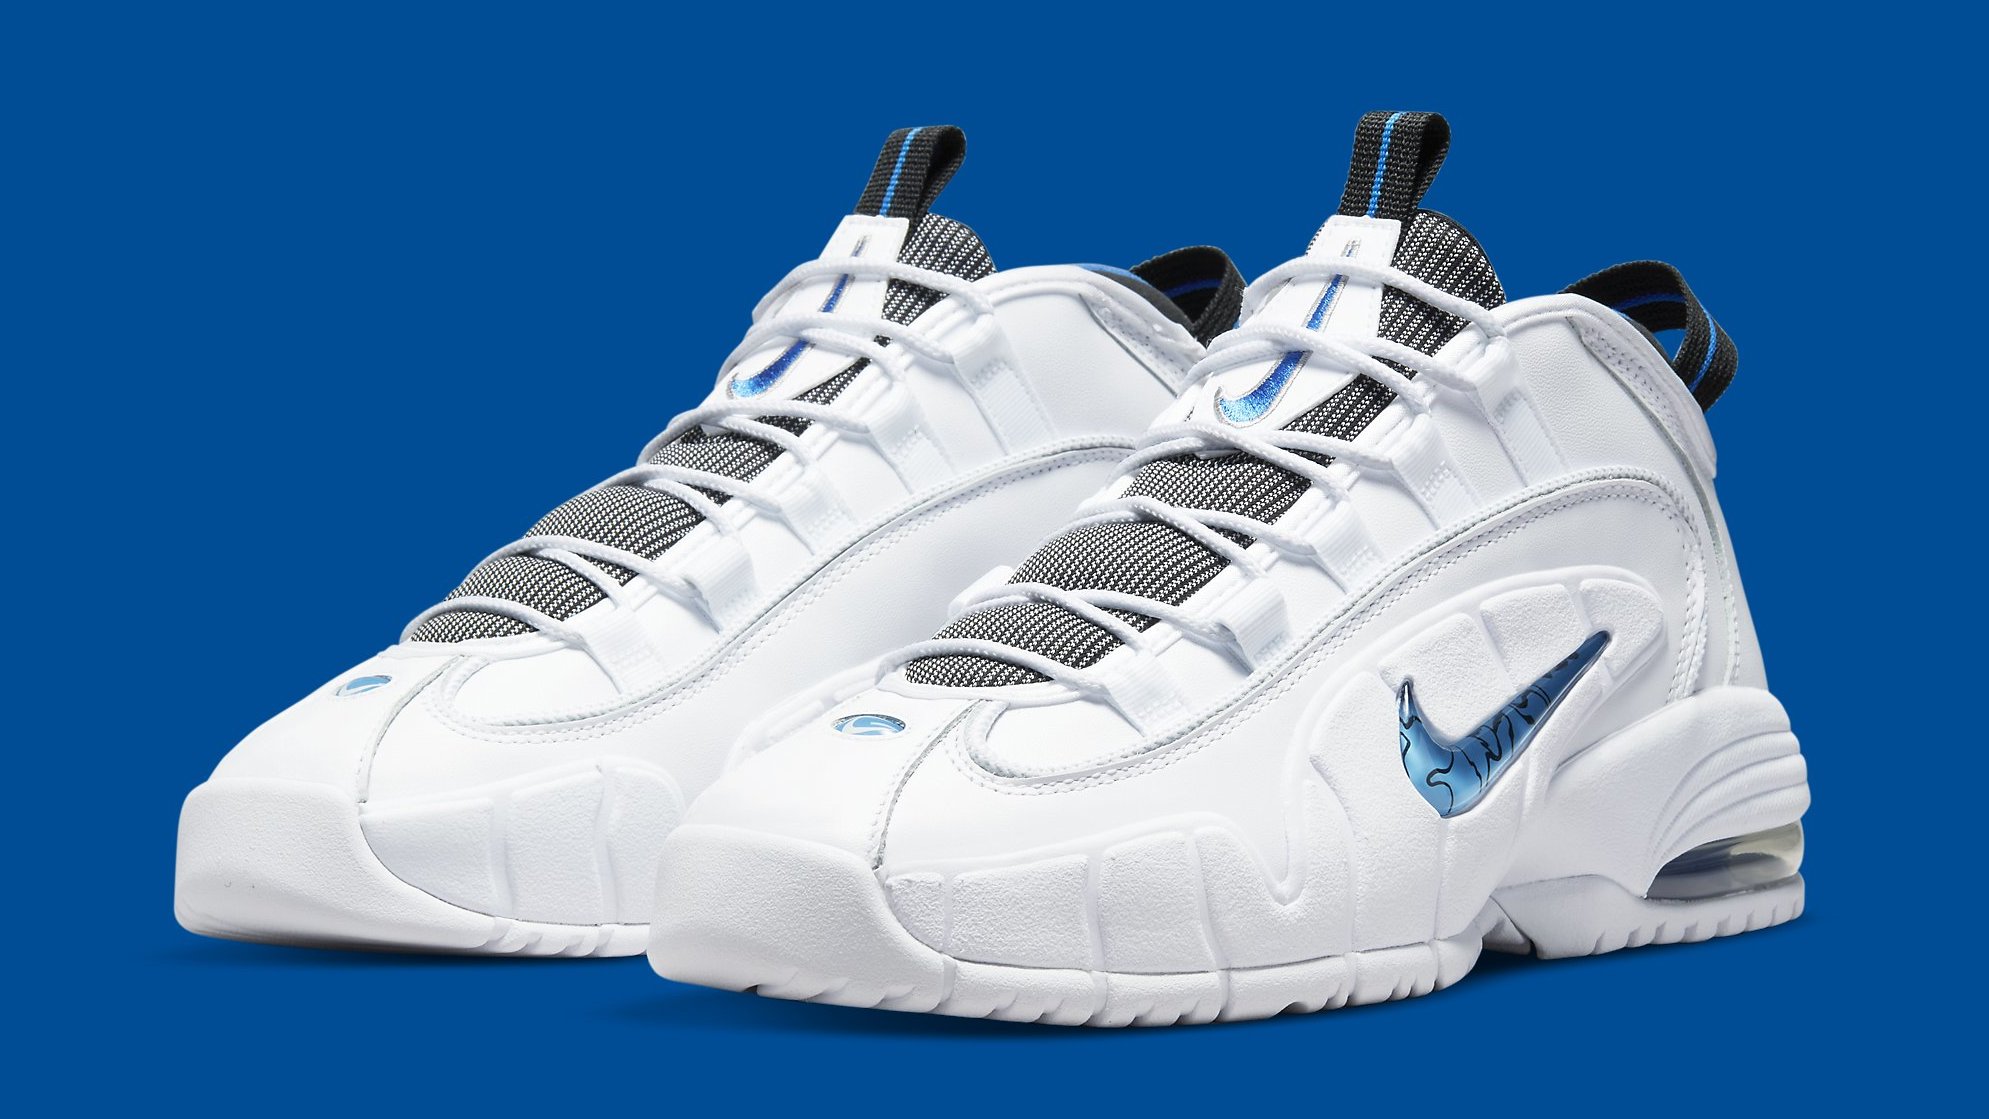 bon God Specificiteit The 'Home' Nike Air Max Penny 1 Is Finally Returning | Complex